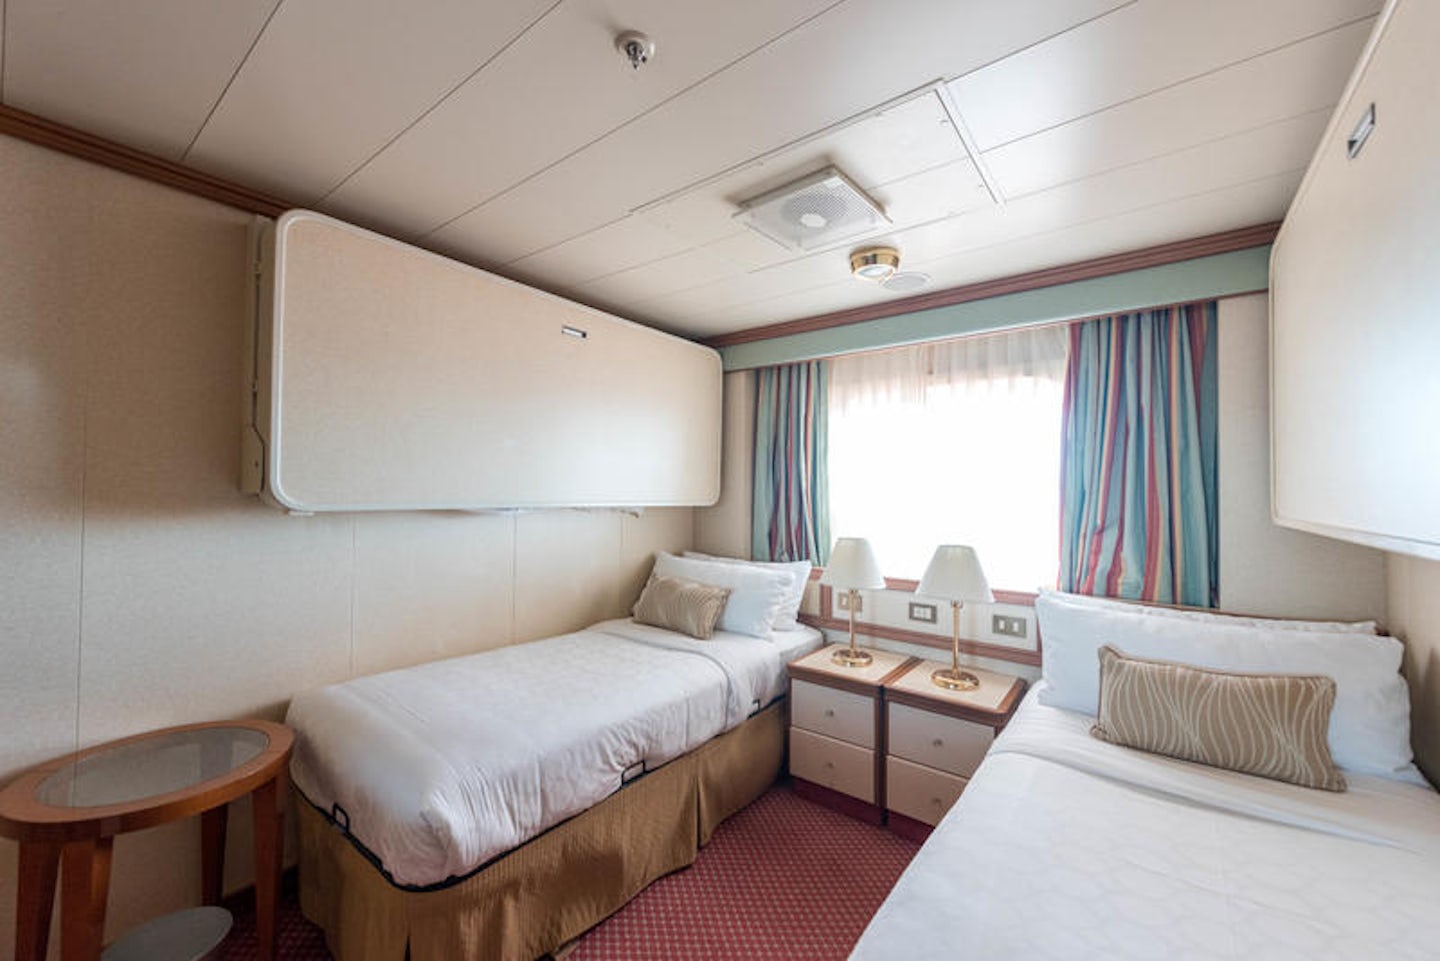 The Obstructed Ocean-View Cabin on Emerald Princess